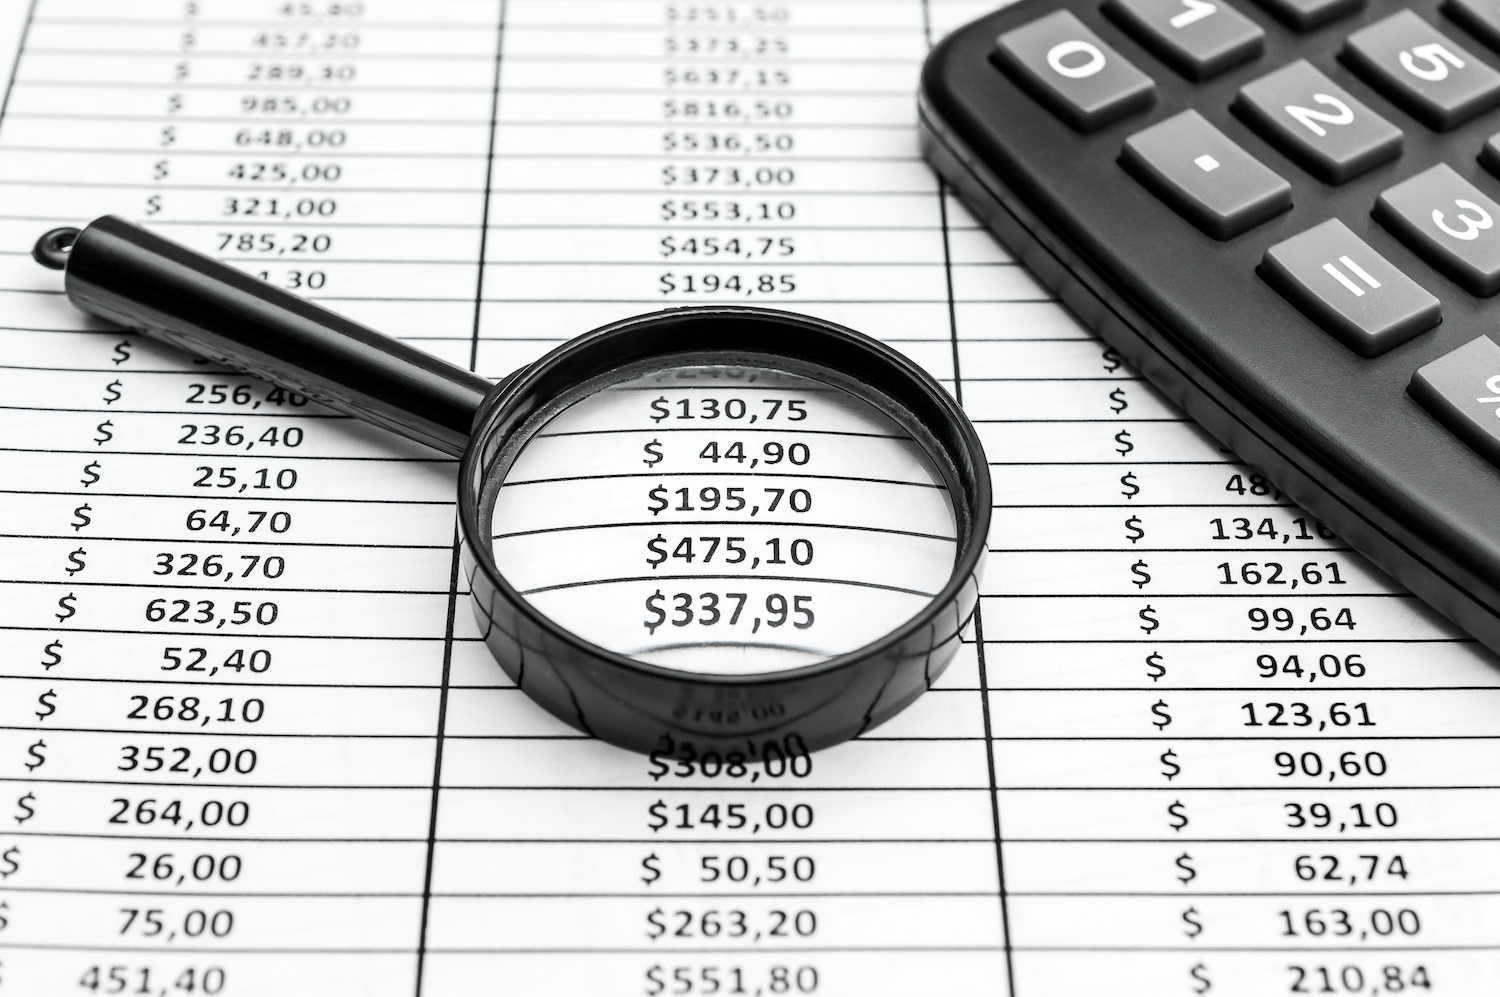 Magnifying glass over financial figures, Adobe Stock